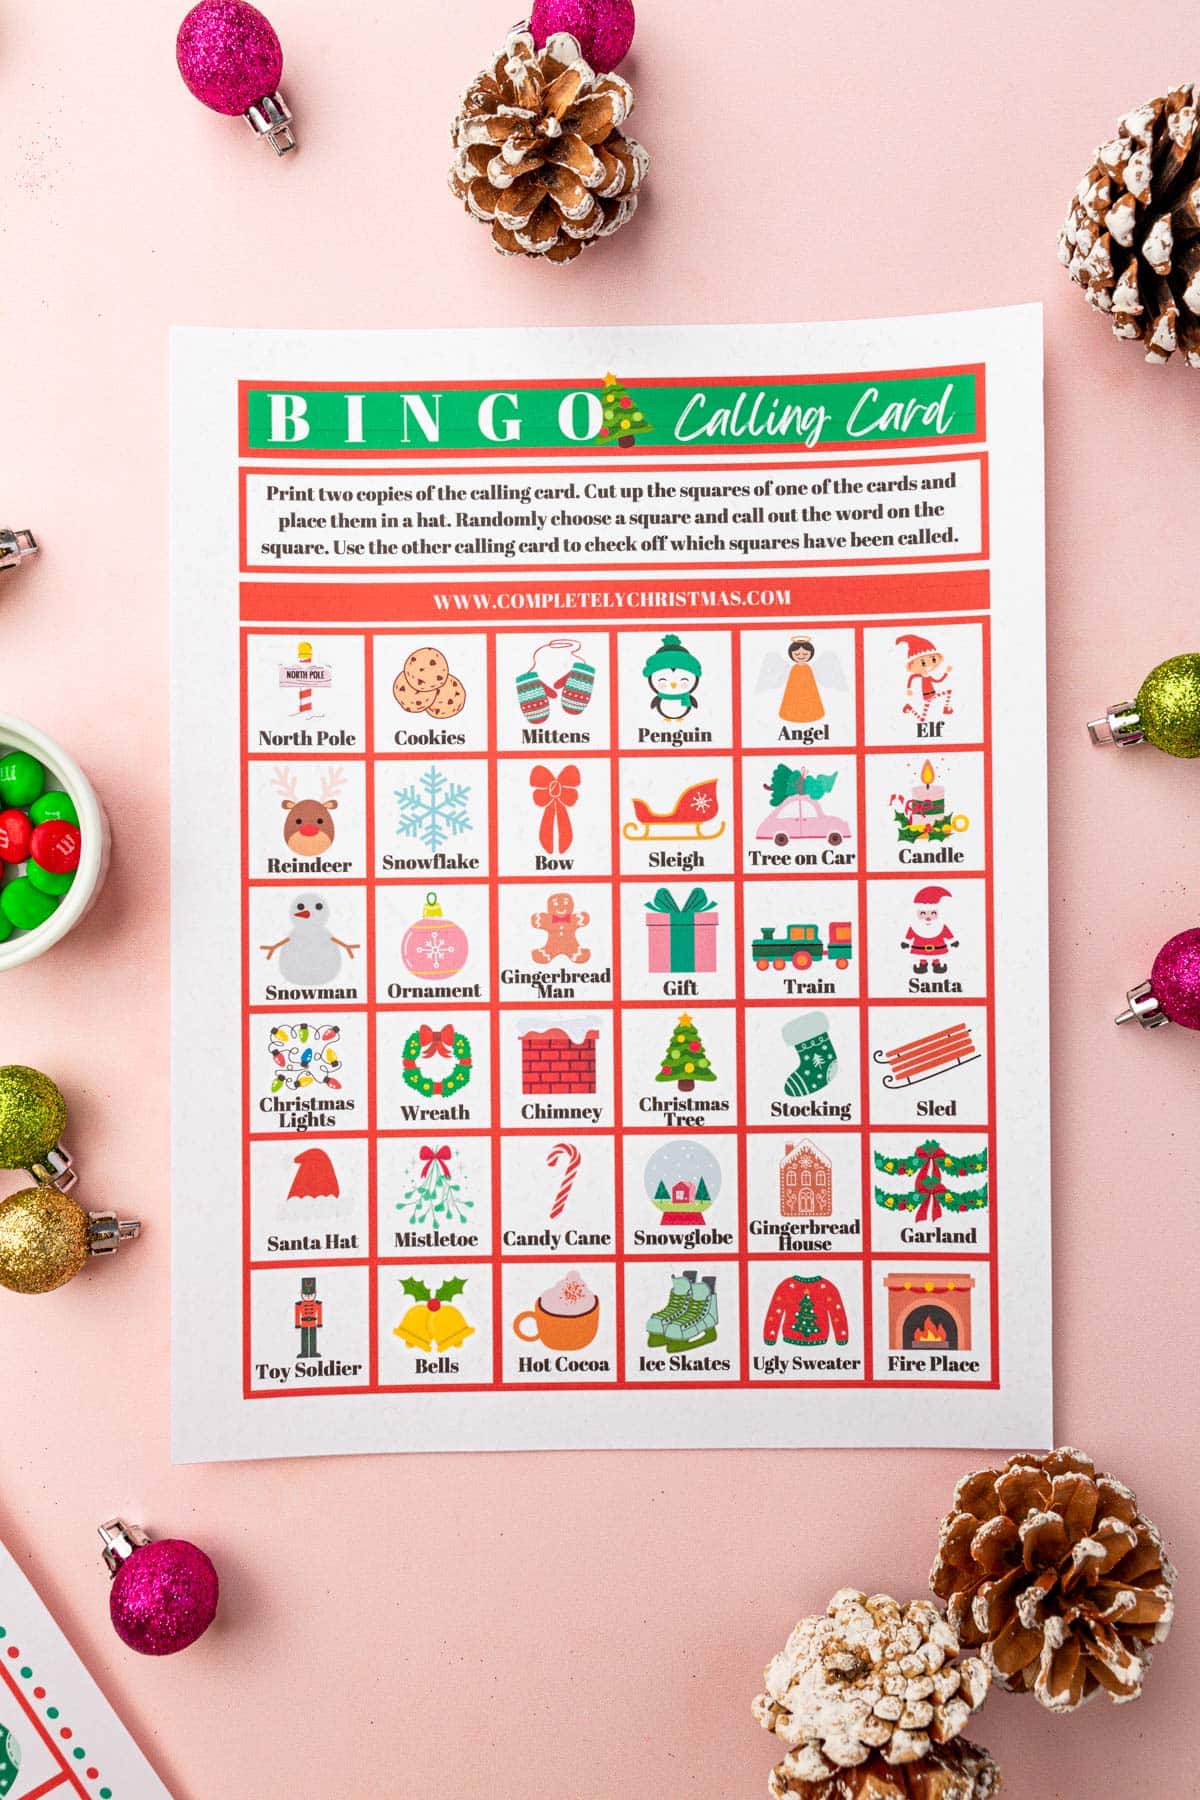 A printable Christmas Bingo calling card on a pink table with mini ornaments and pine cones on the surface.